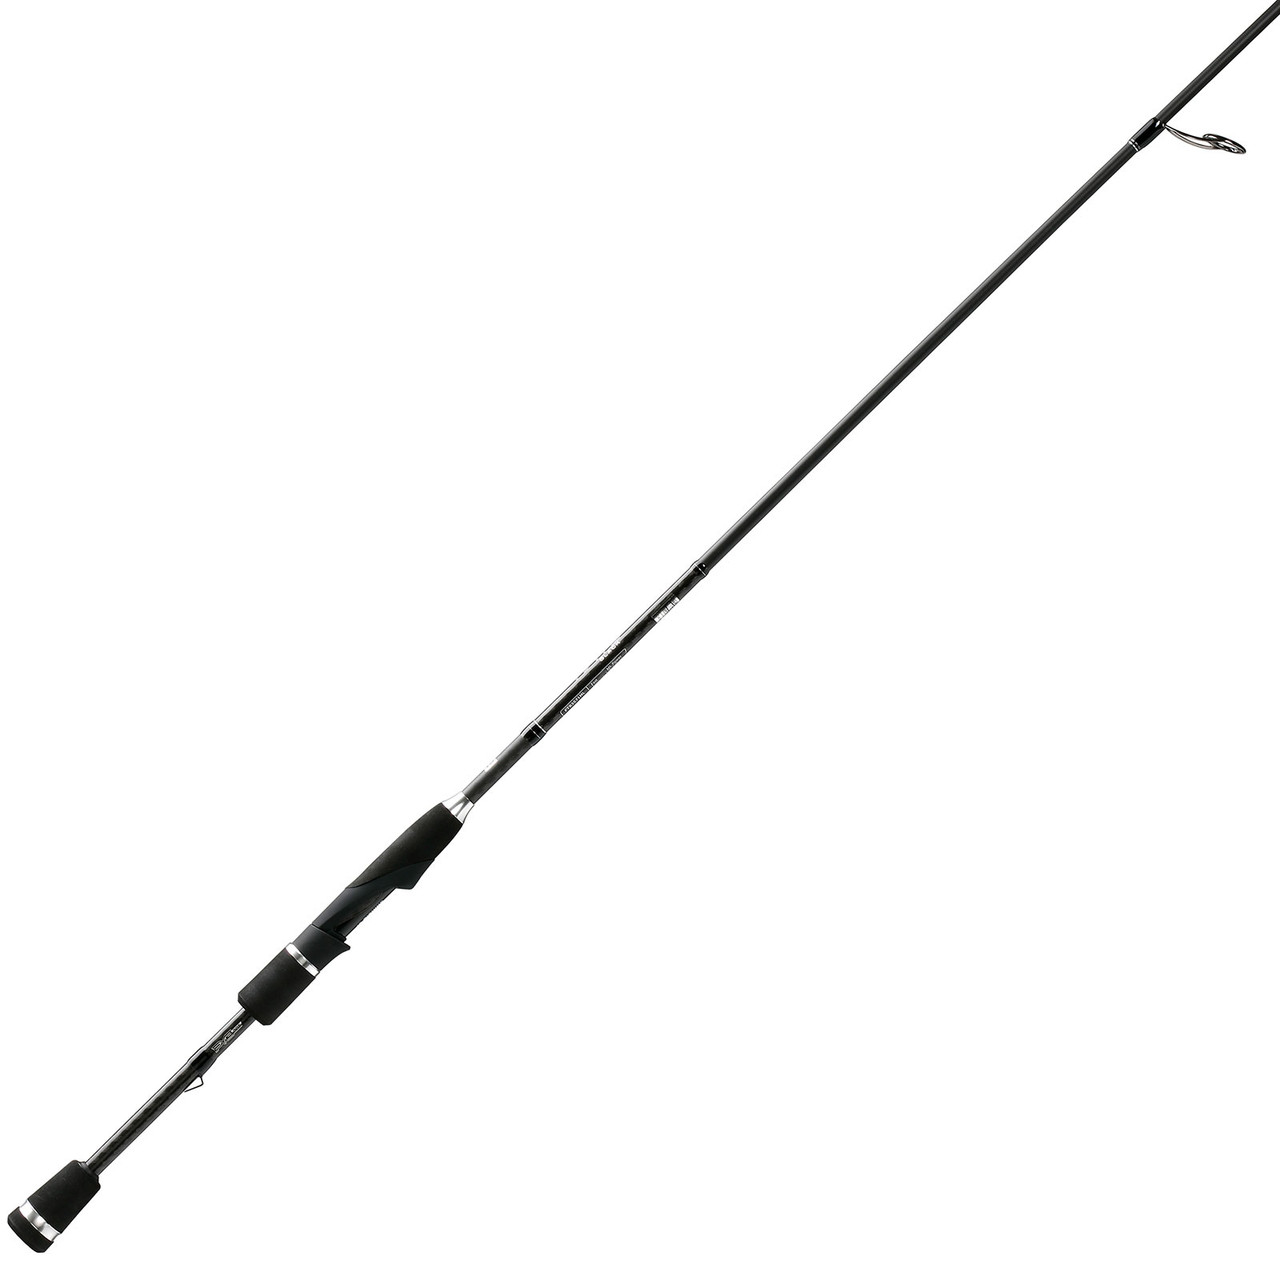 3 Piece Travel Series Spinning Rod (RRCS703MH) - Black